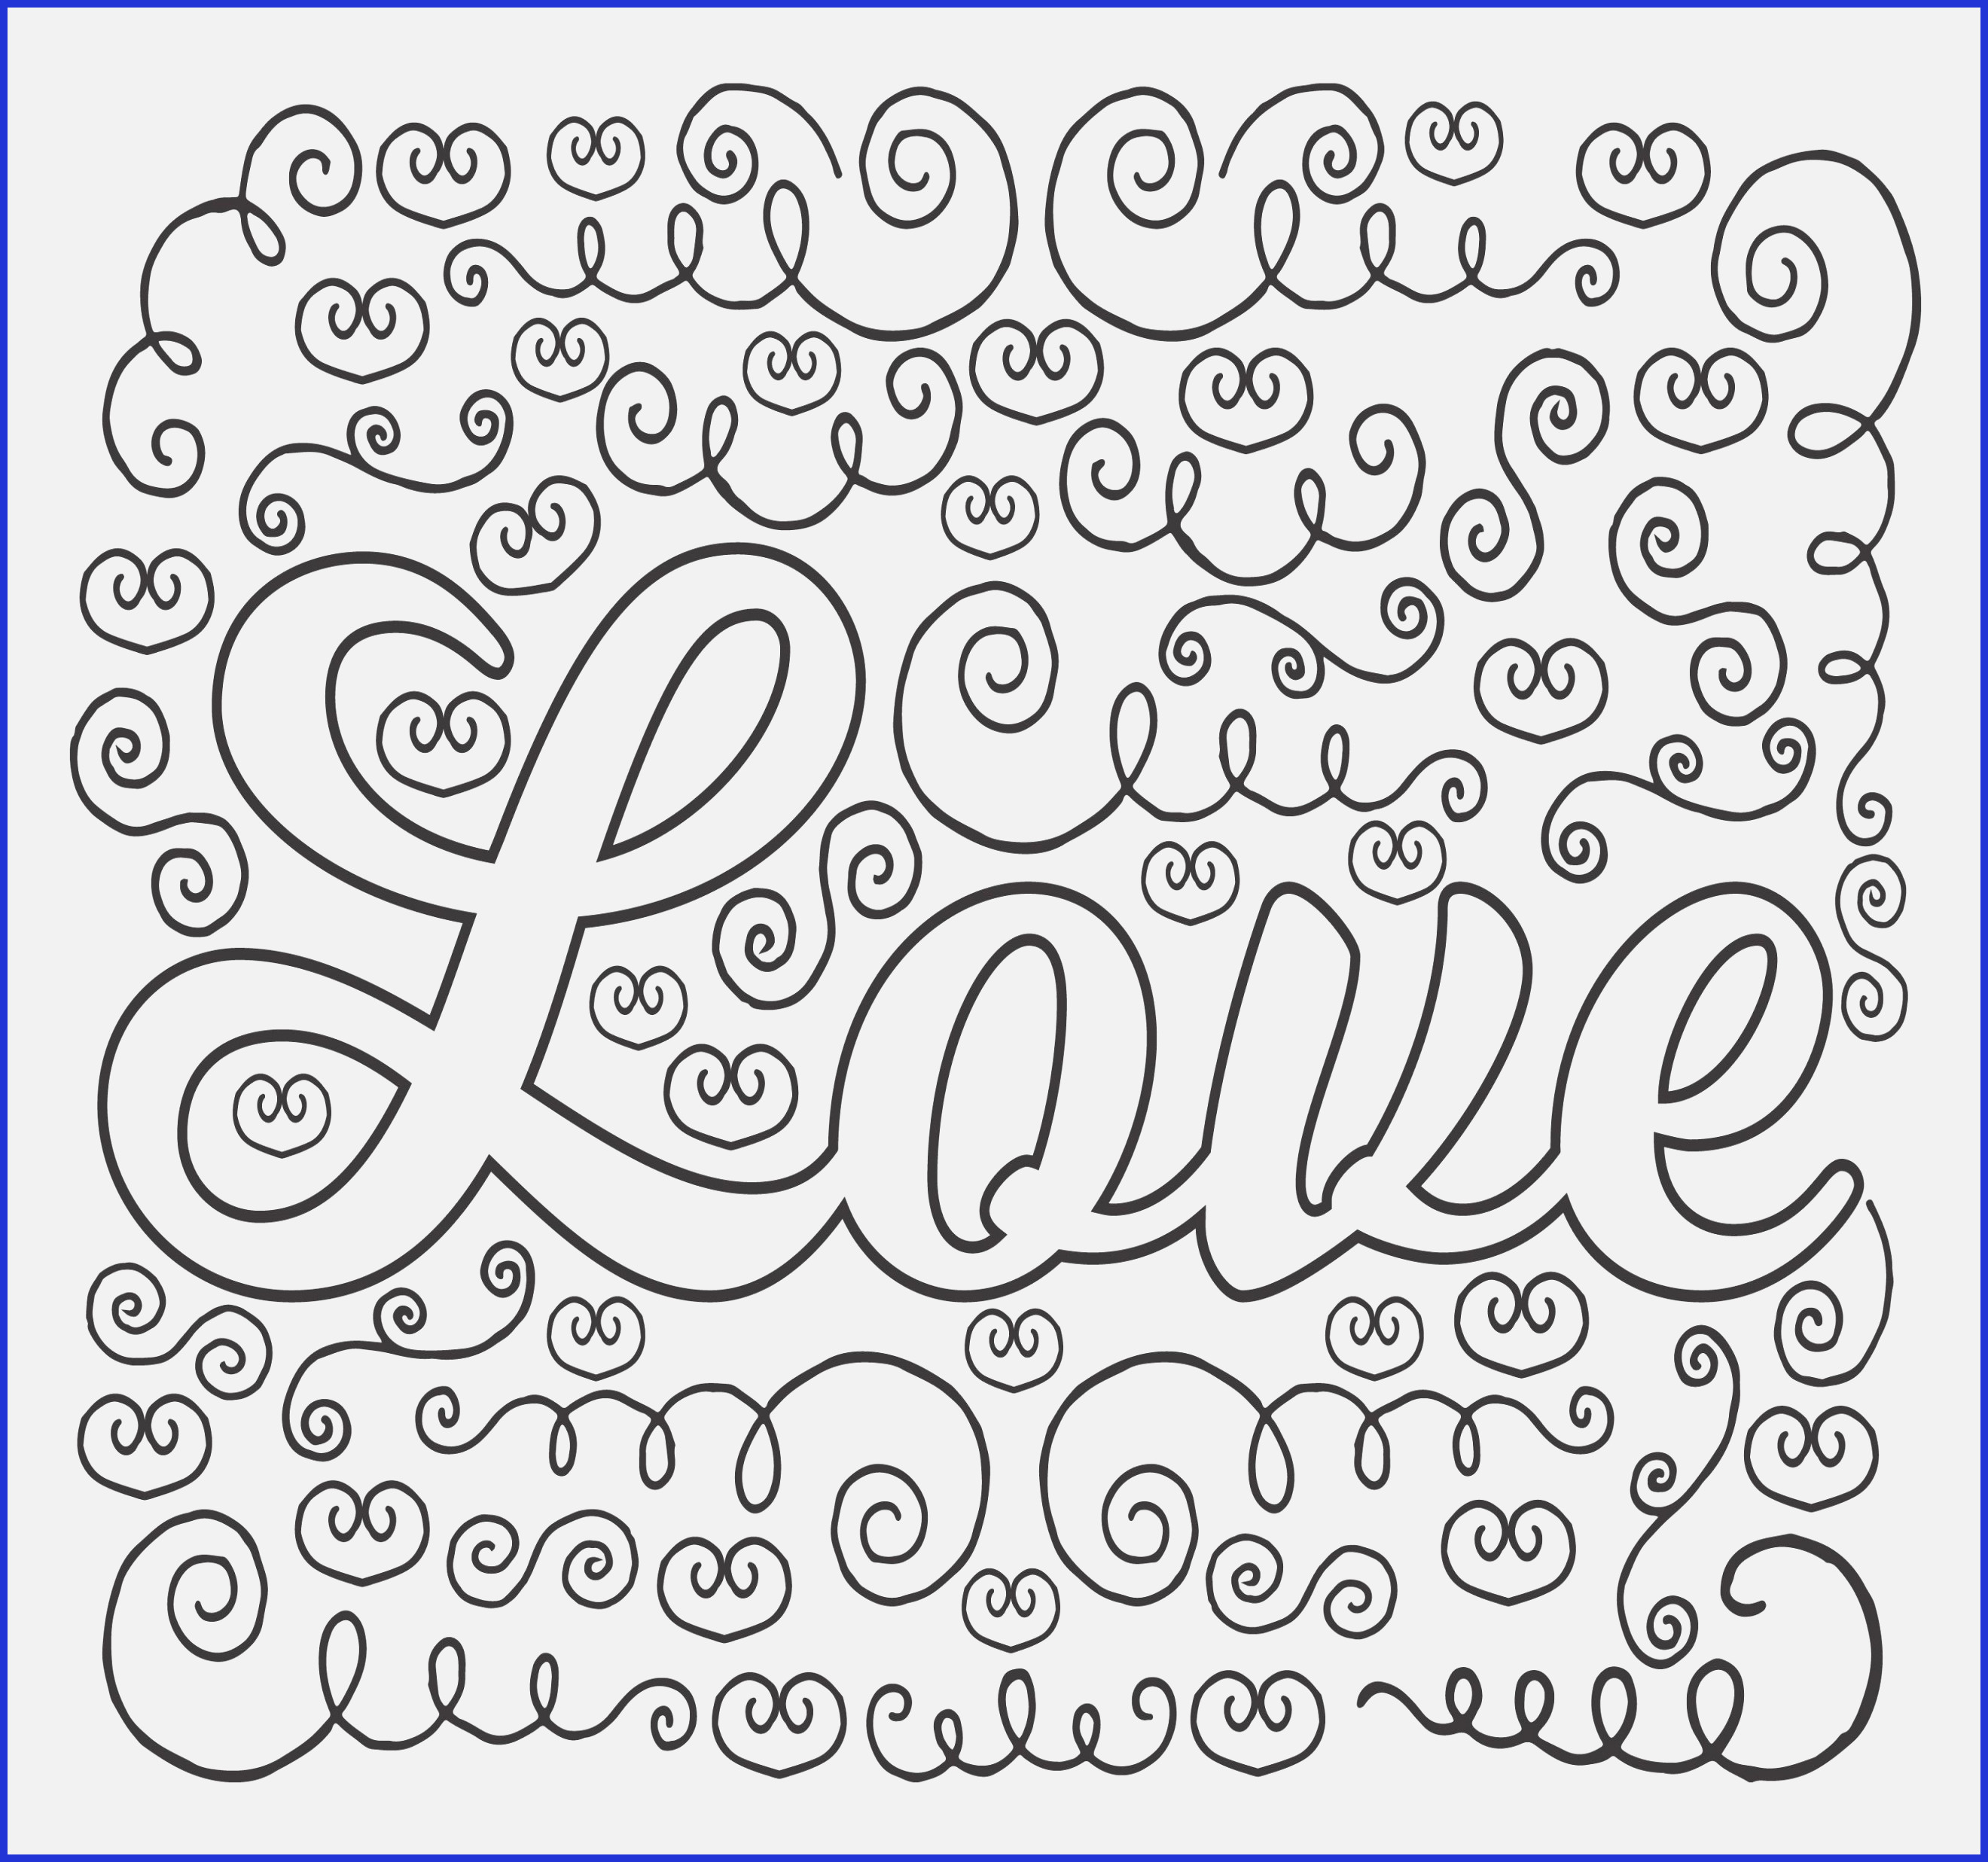 Monster Coloring Pages To Print Printable Monster Coloring Pages Free Printable Love Coloring Pages